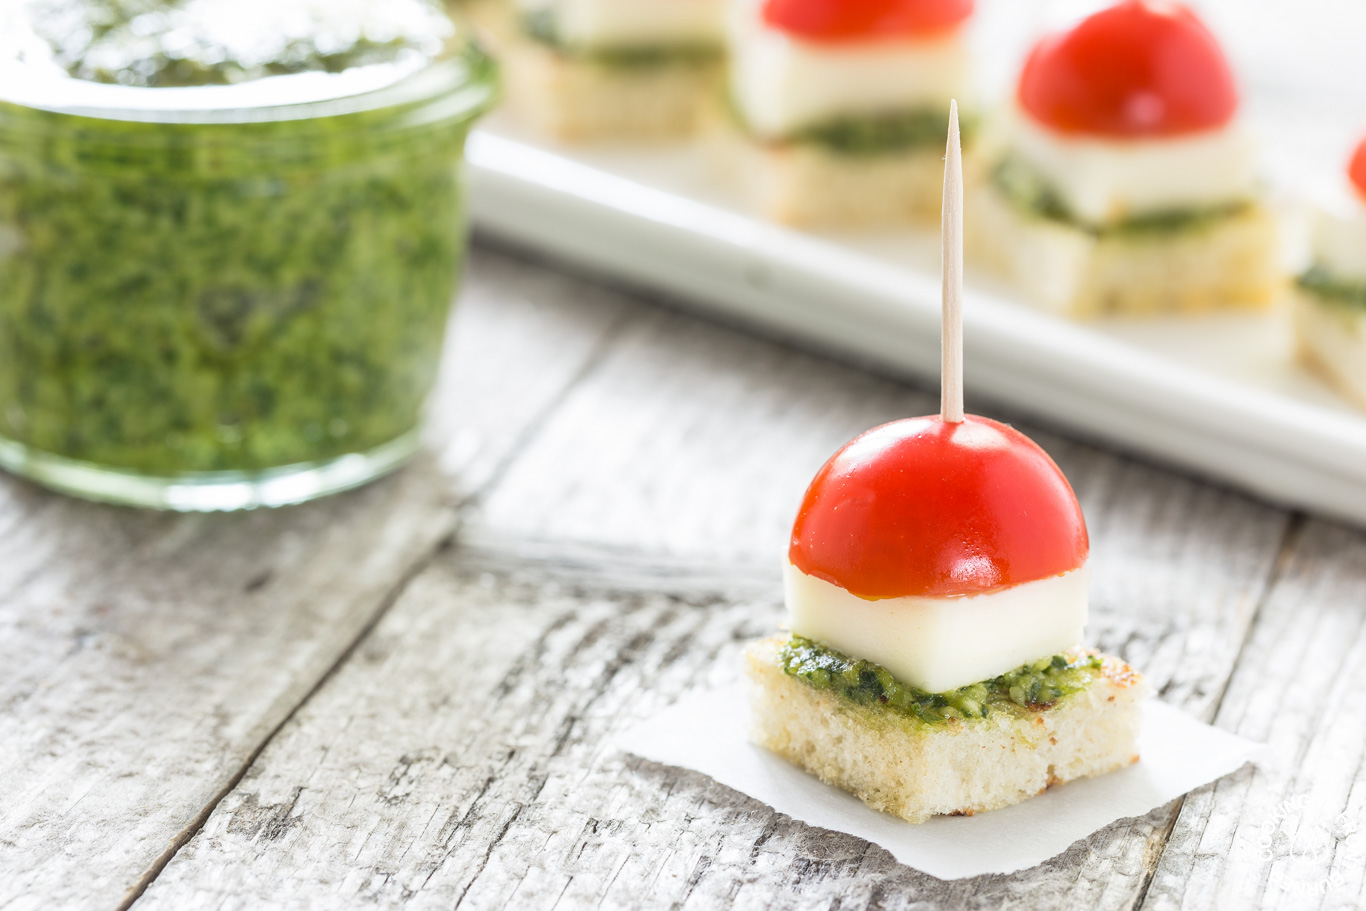 Caprese Bites With Pesto | Cooking on the Front Burner